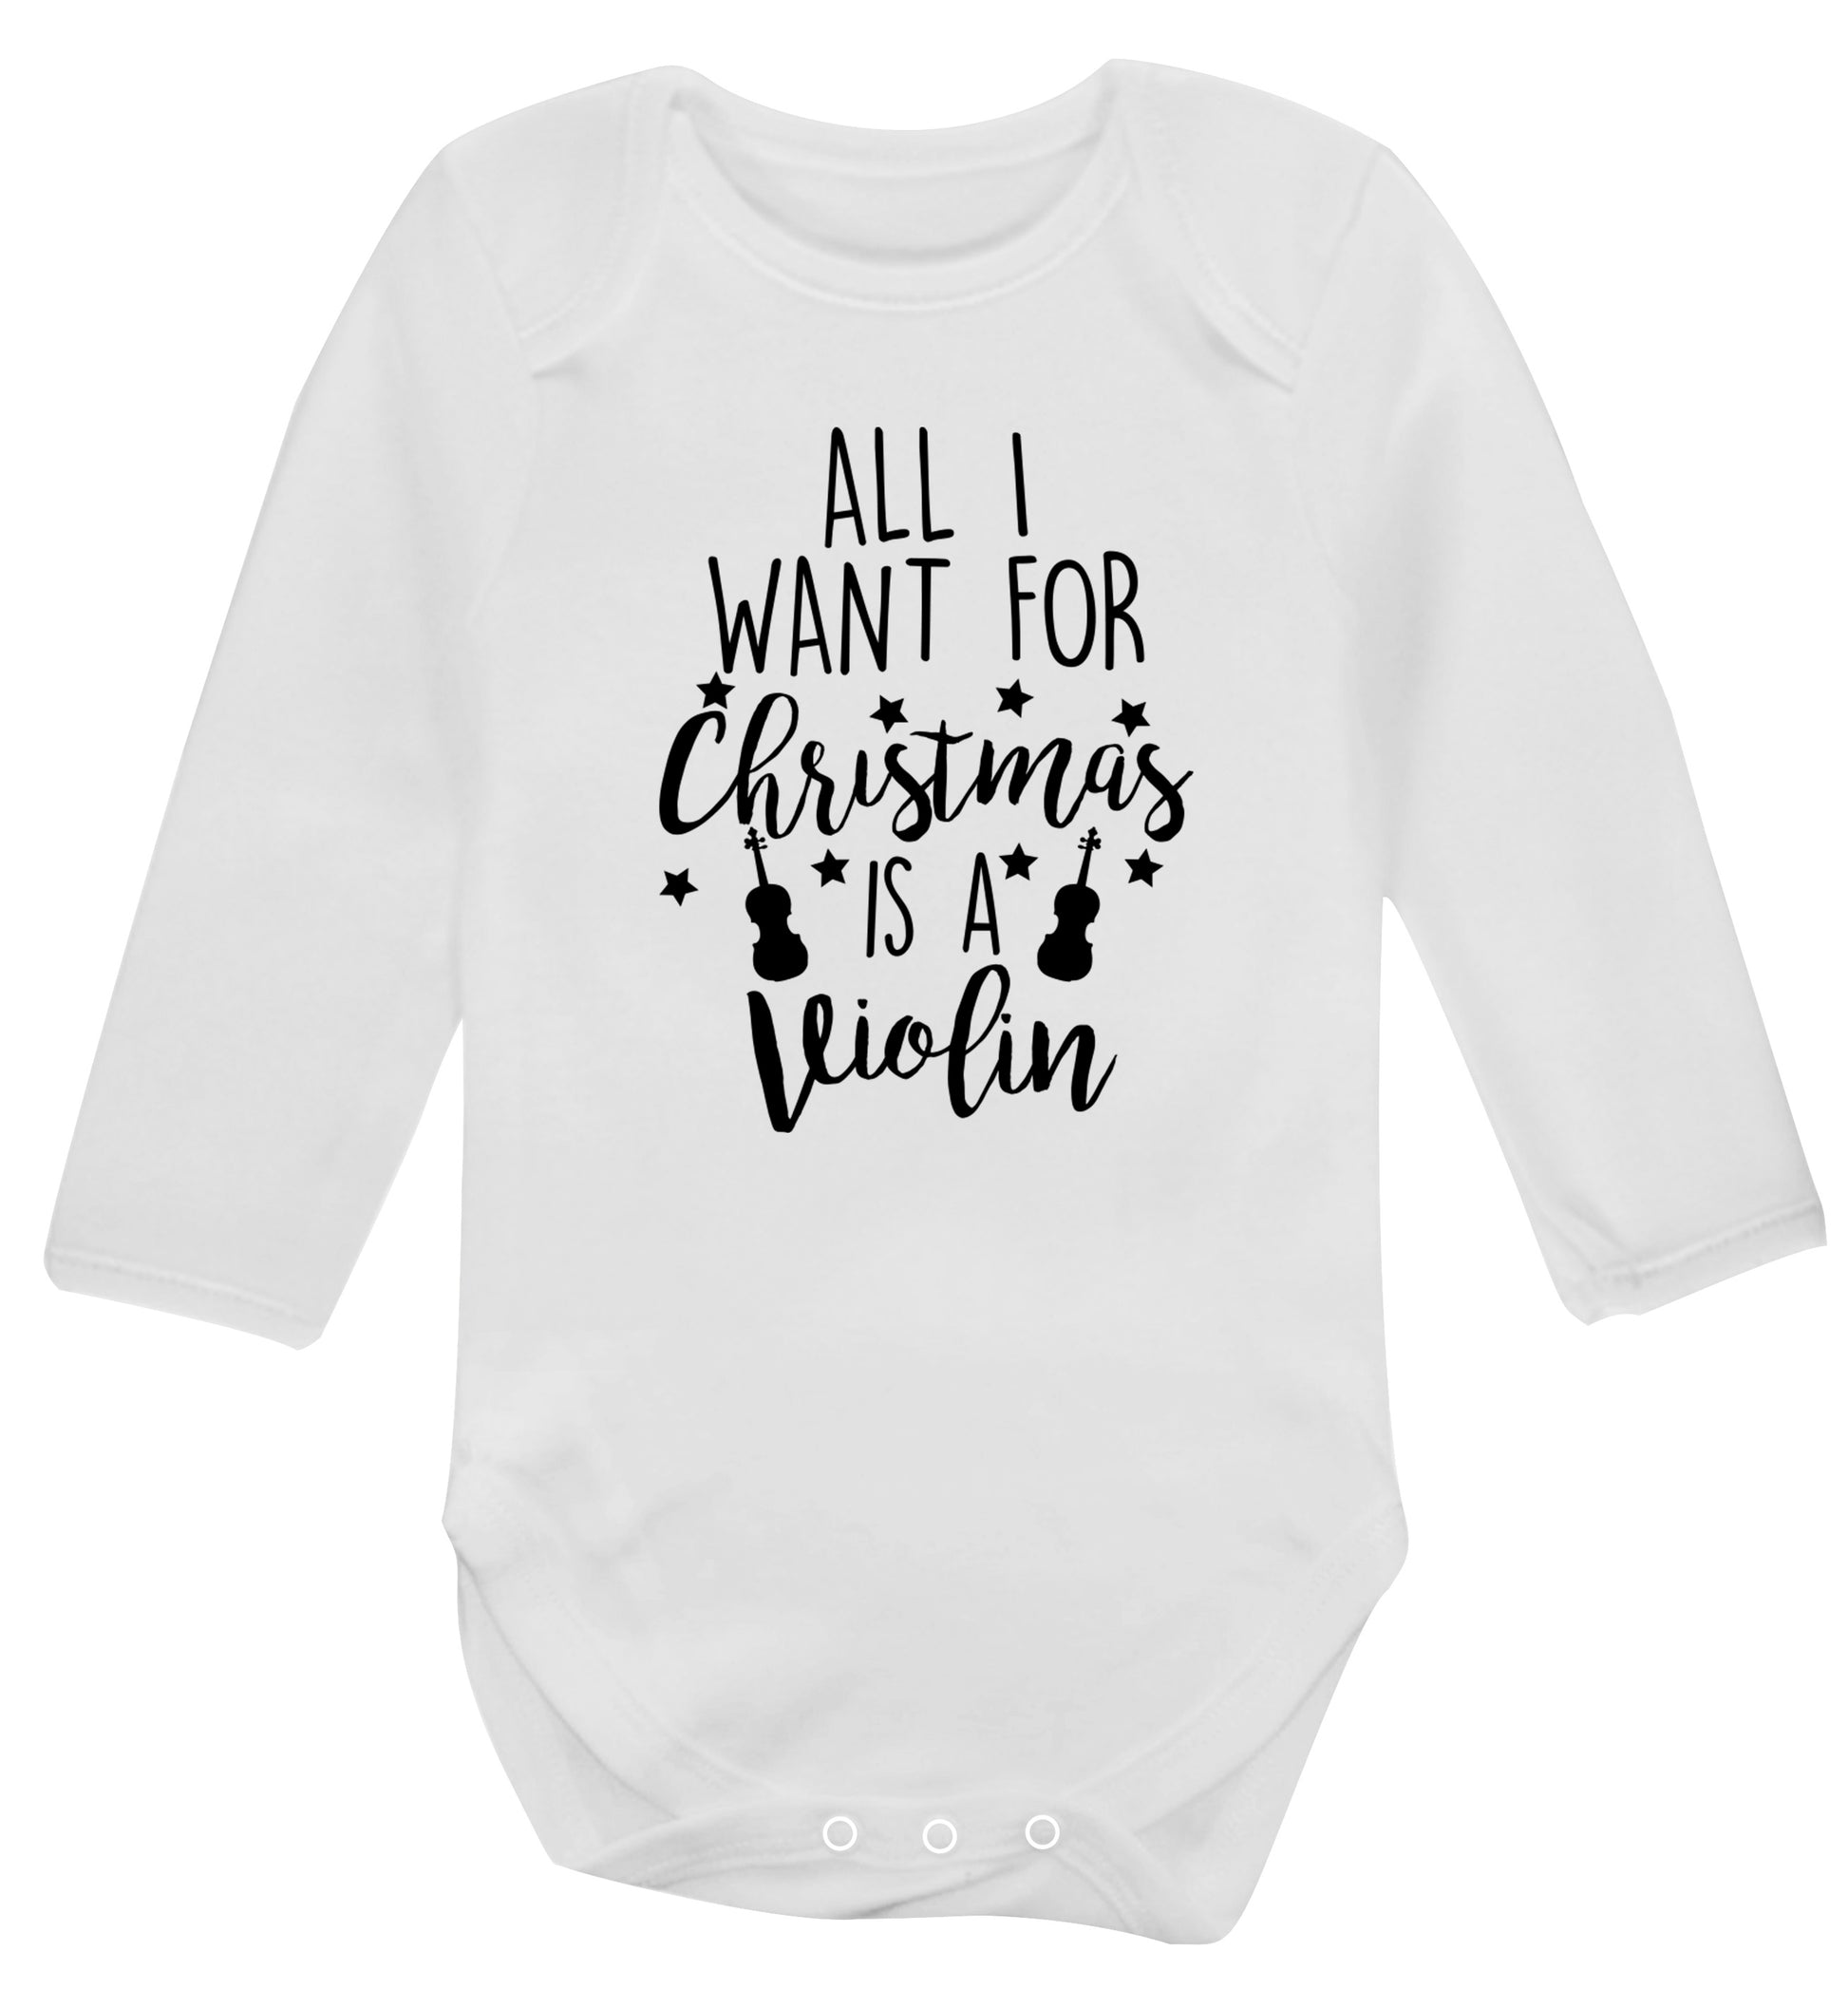 All I Want For Christmas is a Violin Baby Vest long sleeved white 6-12 months